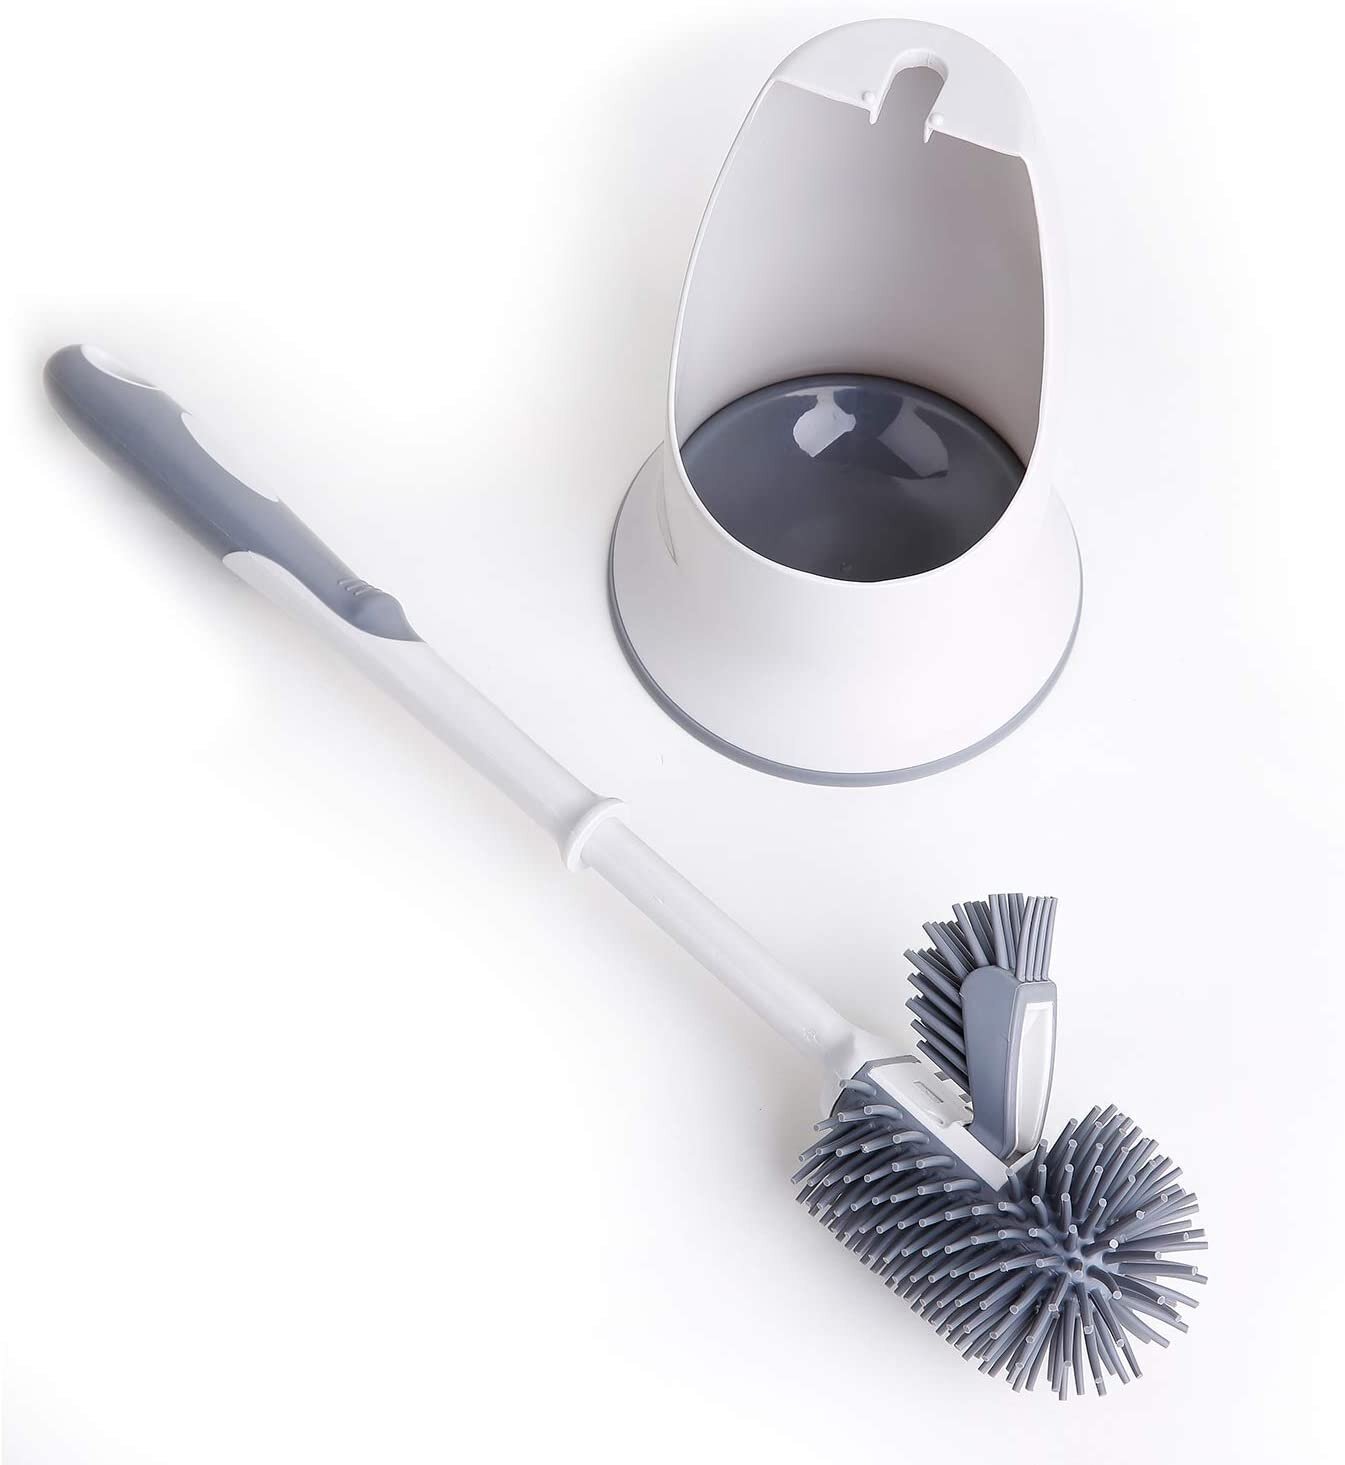 Toilet Brush Open Round Plastic Brushes And Holder Soft Grip Handle Modern Grey